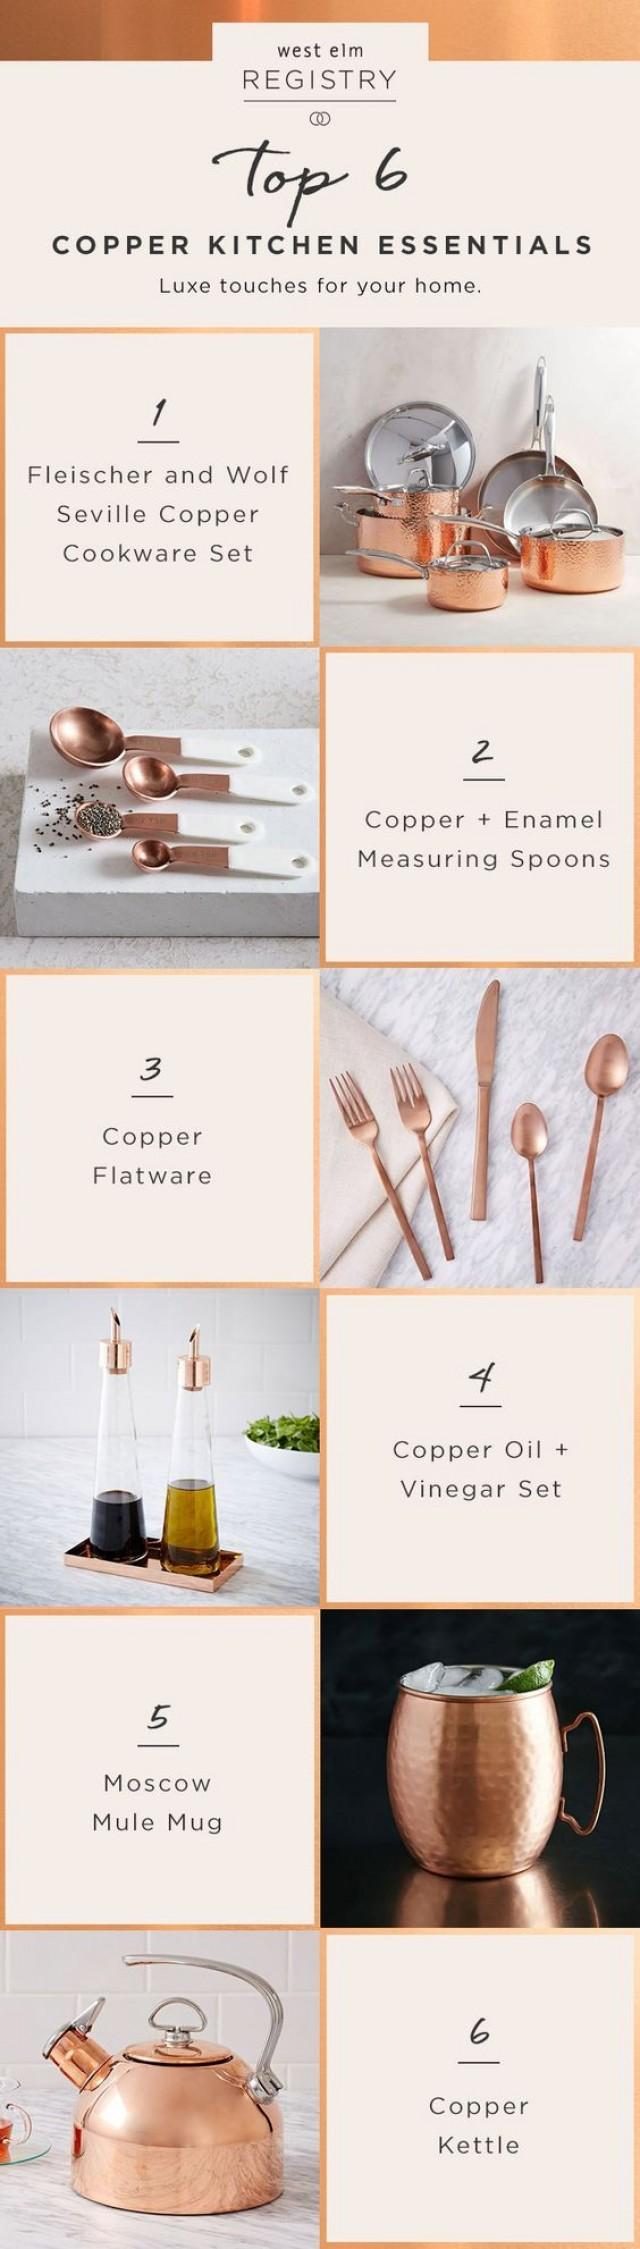 Tying The Knot? These Copper Kitchen Essentials Are Wedding Registry Must-haves! Head Over To Westelm.com To Get Your Registry Started. 